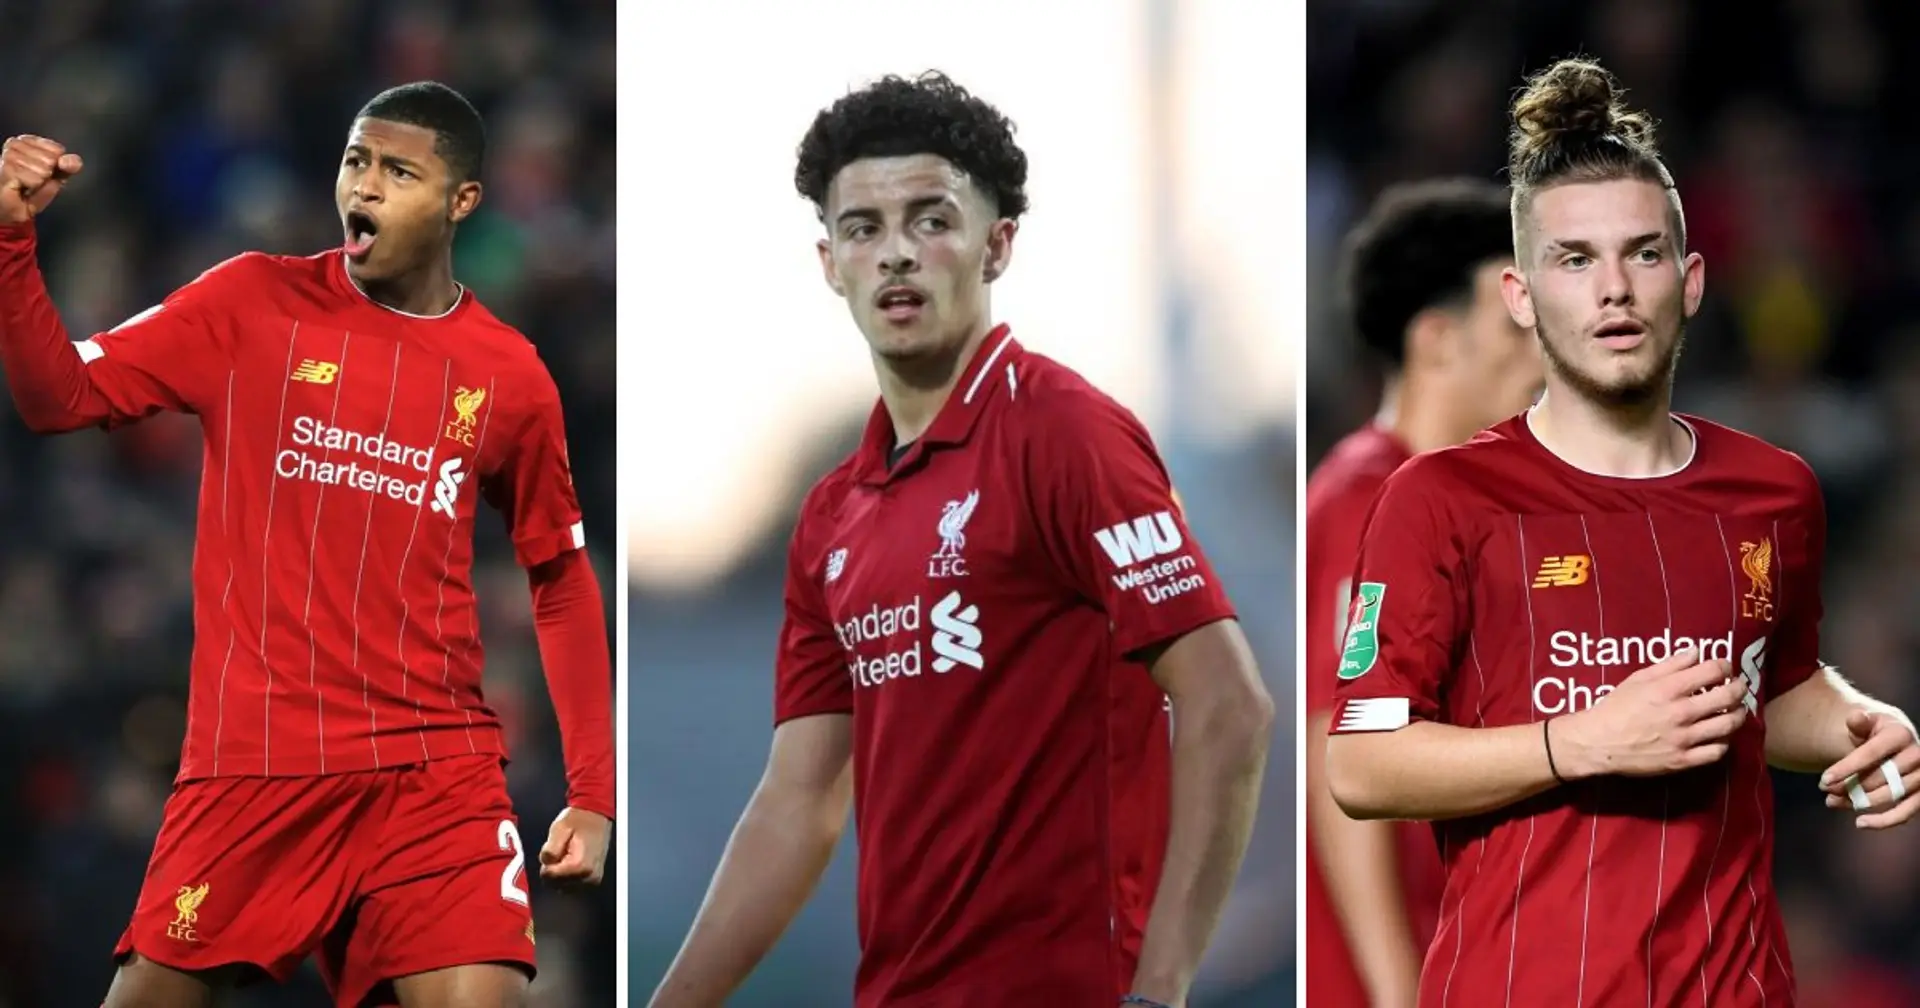 Cream of the crop: Liverpool's 6 most promising U21 players